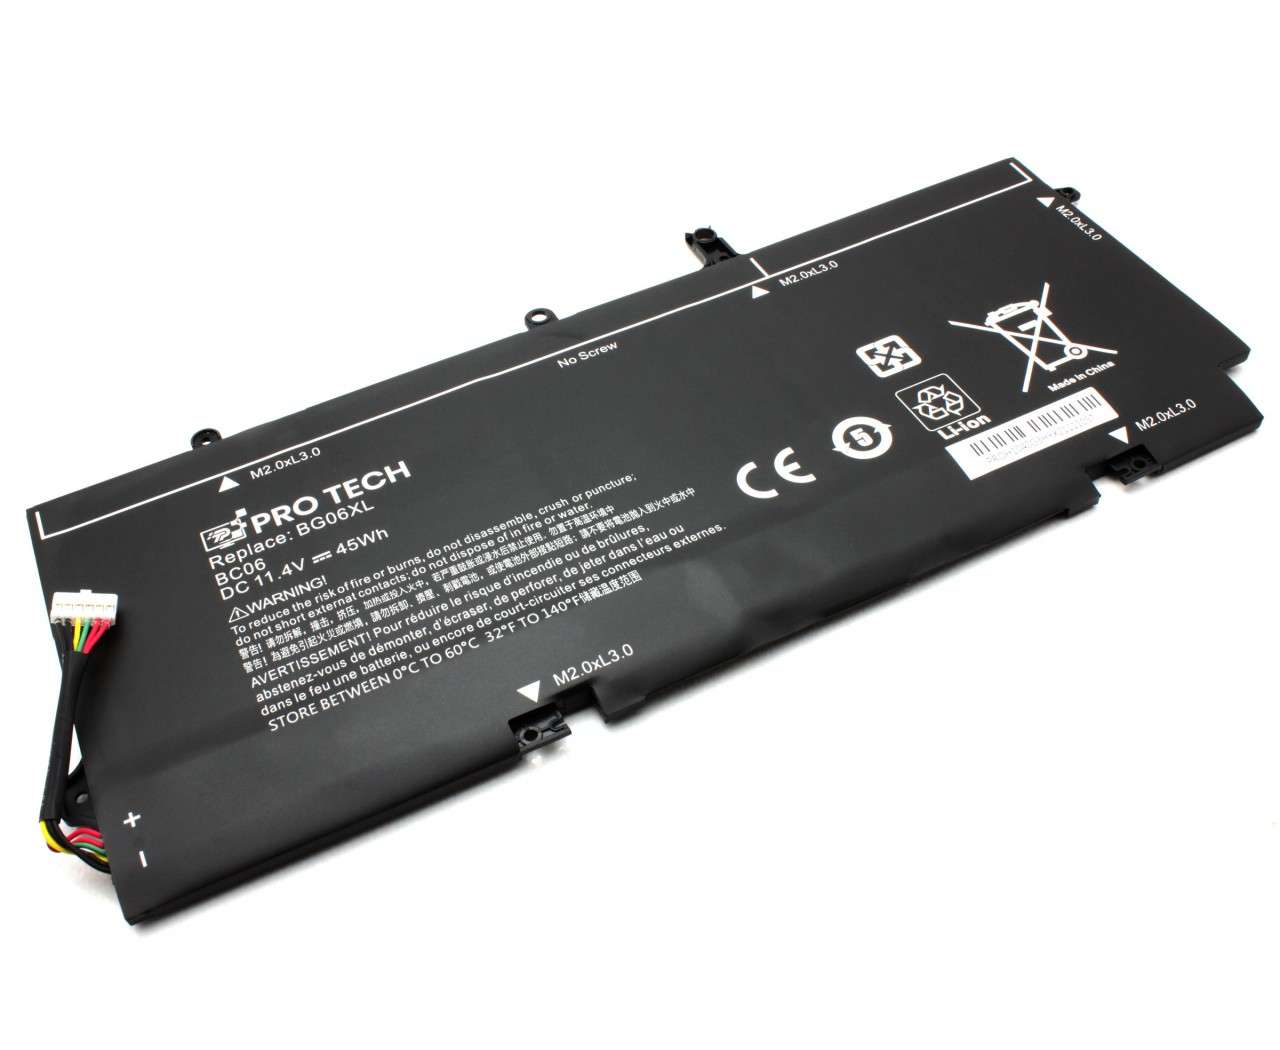 Baterie HP EliteBook 1040 G3 Protech High Quality Replacement 1040 imagine noua reconect.ro